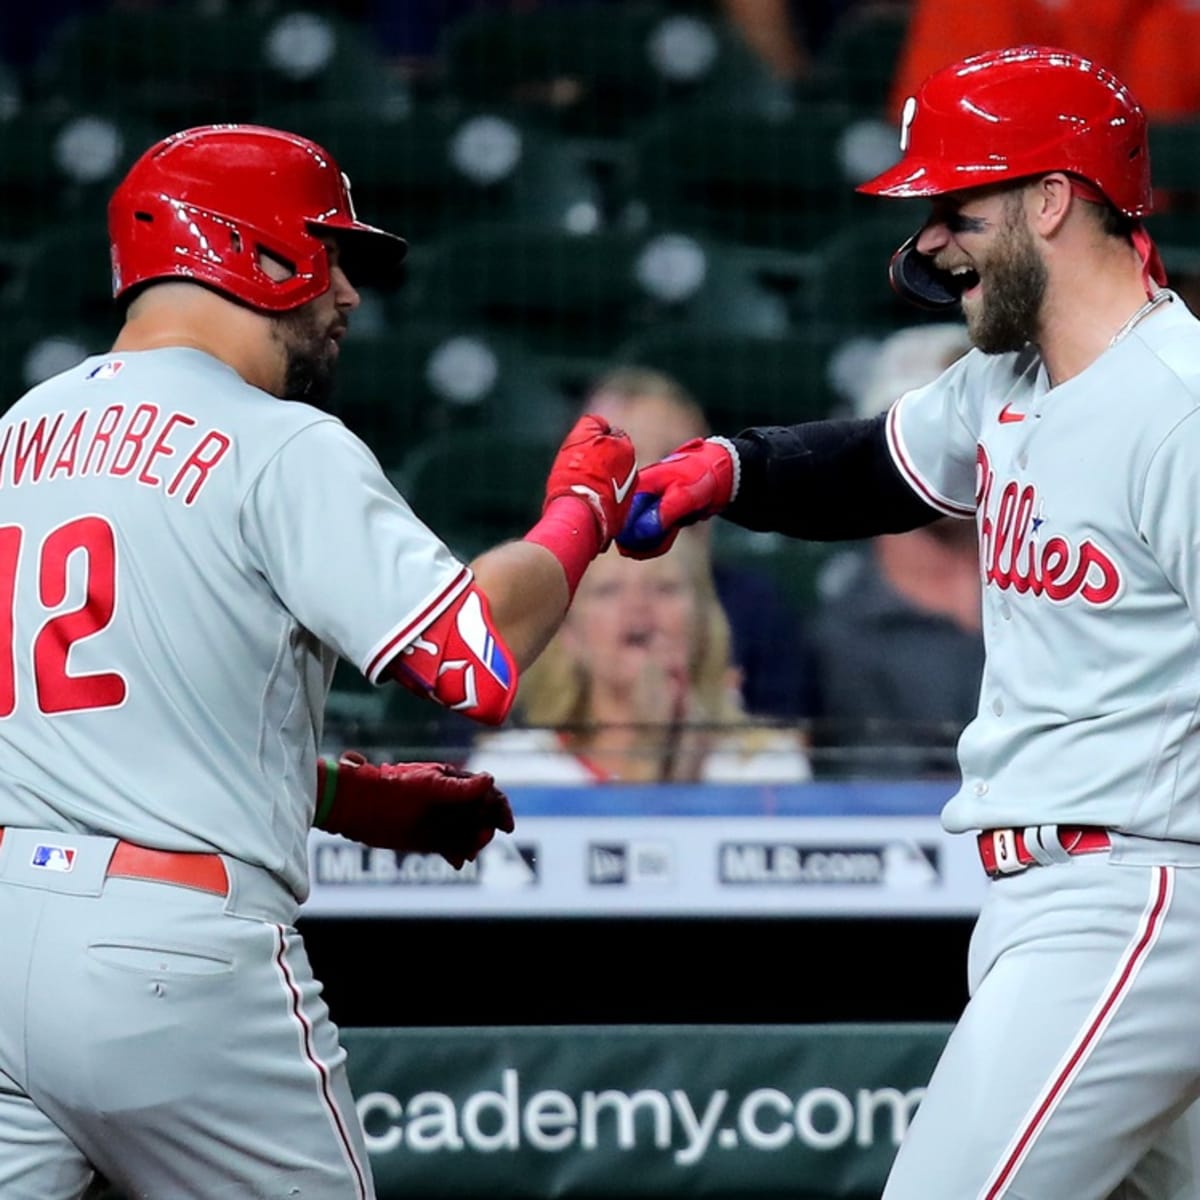 Loaded on offense, Phillies aim to snap postseason drought - The